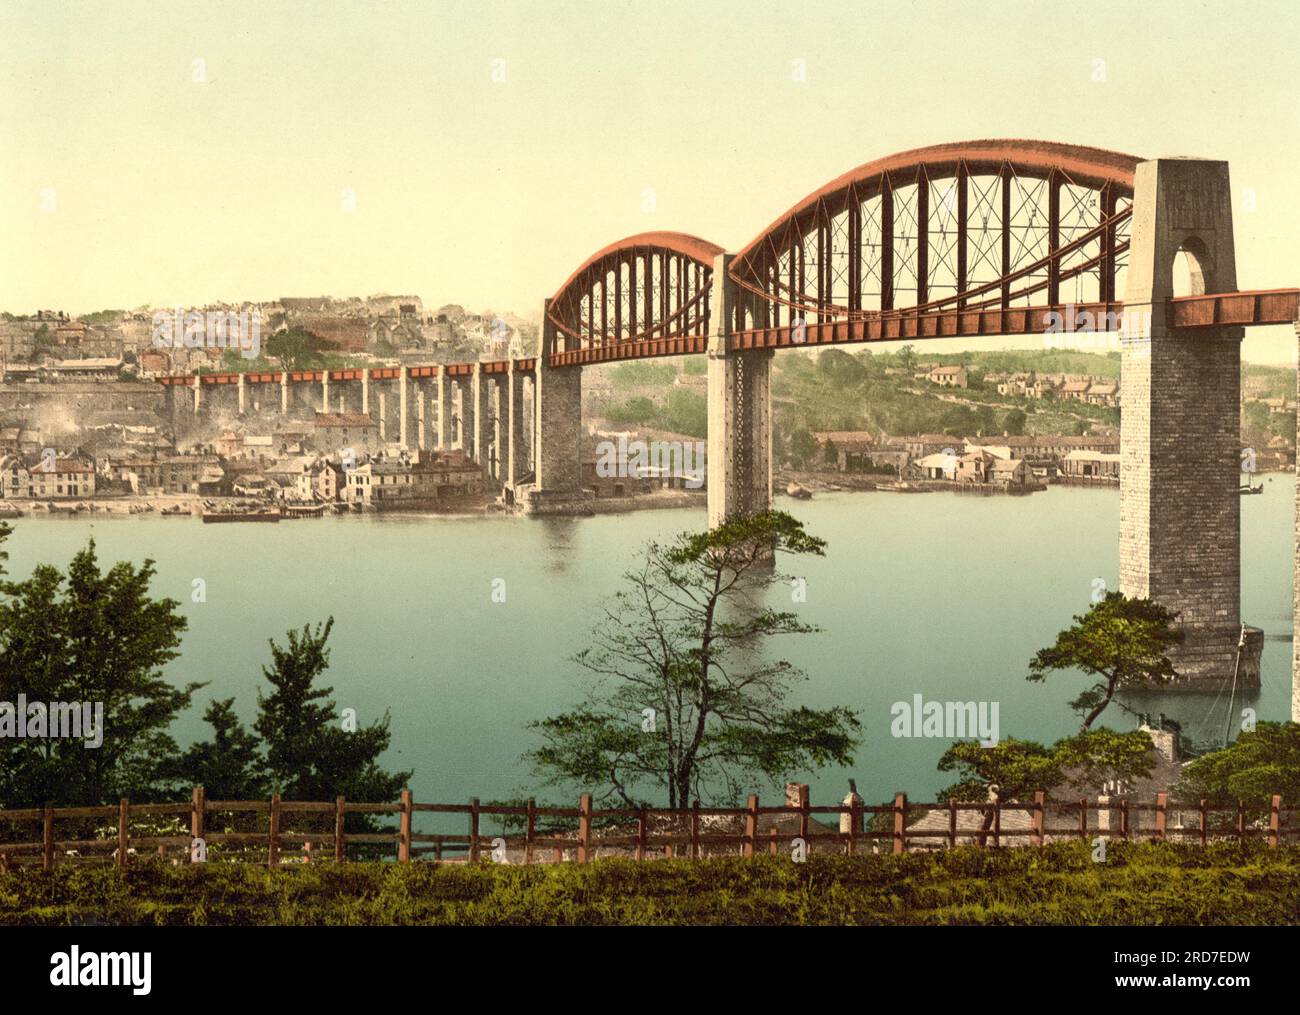 Saltash Bridge, Plymouth, port city and unitary authority in South West England, England, 1895, Historical, digital improved reproduction of an old Photochrome print Stock Photo